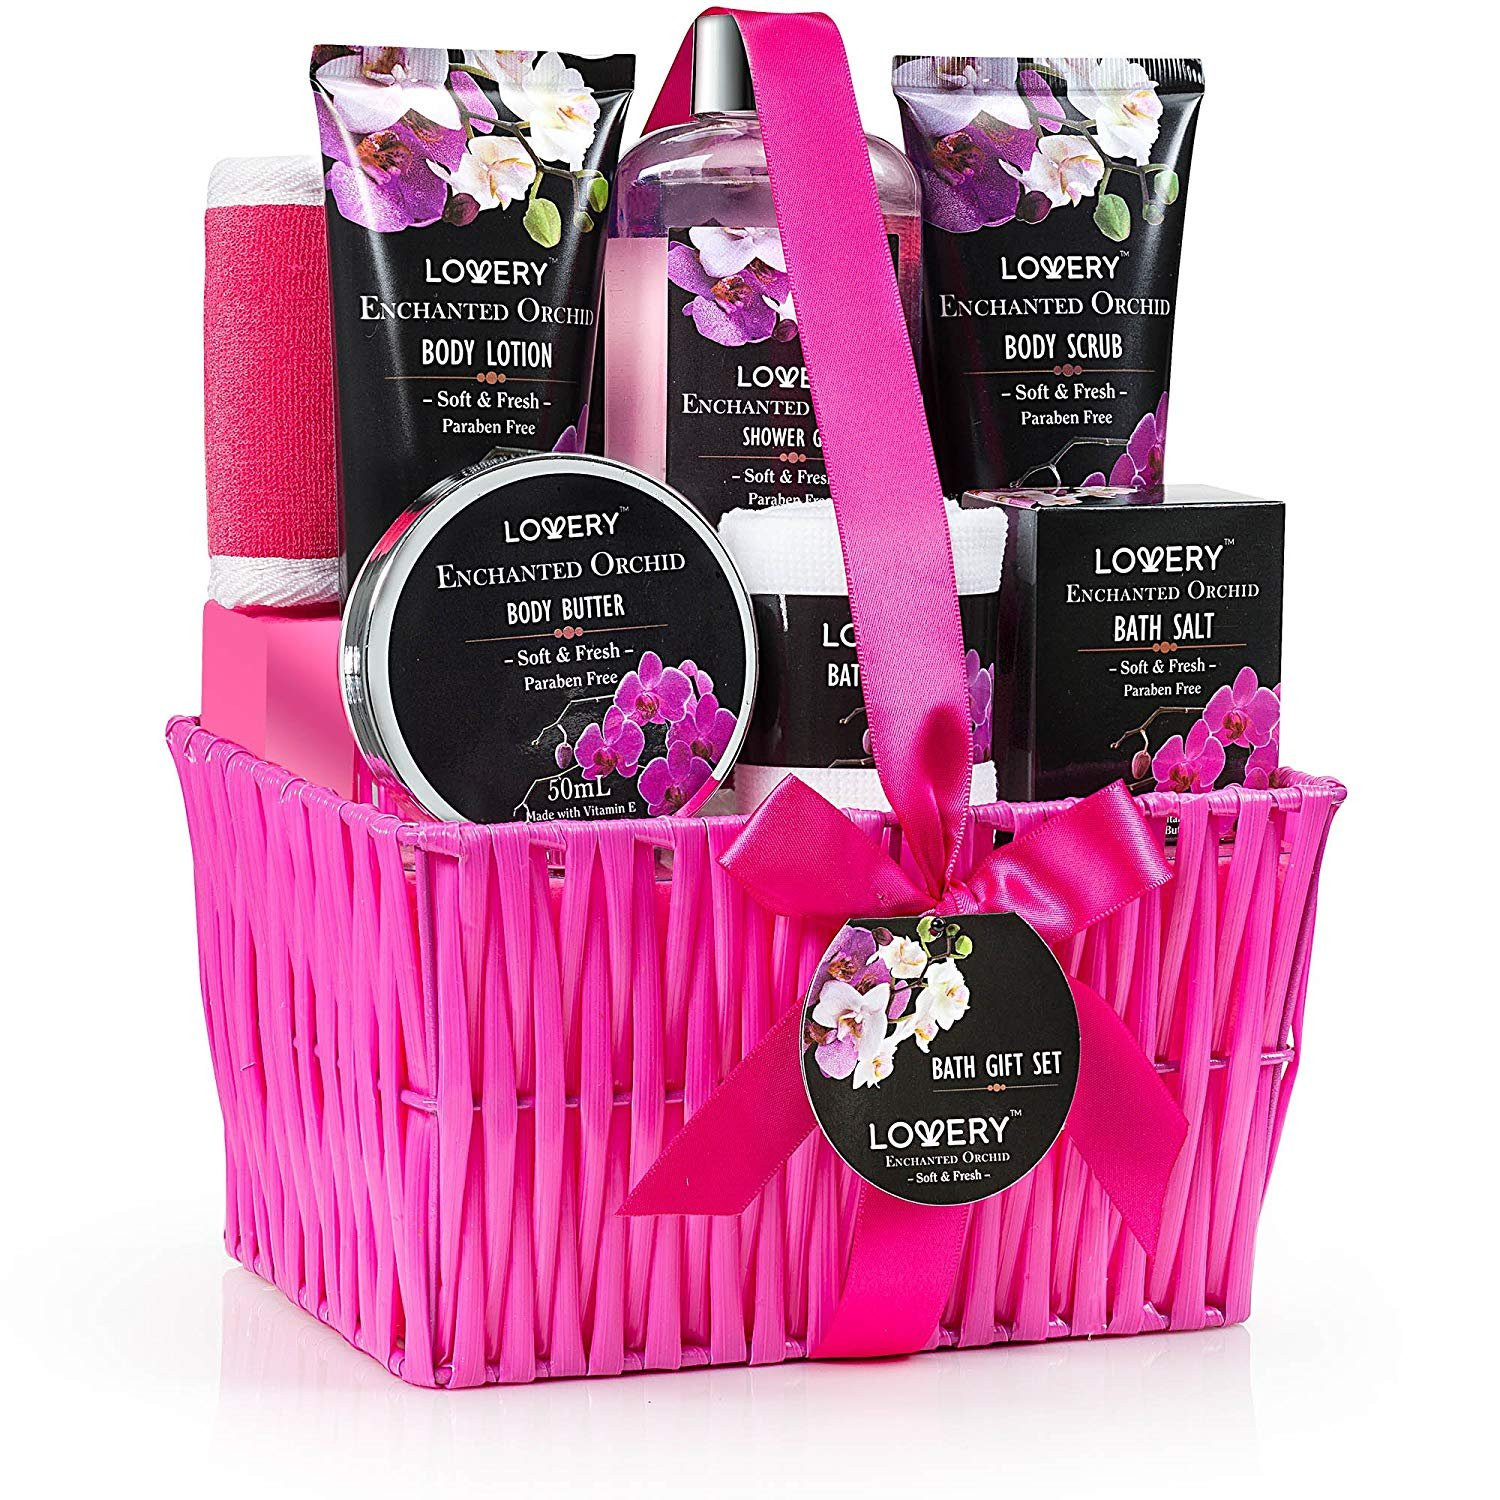 Bath And Body Gift Basket Ideas
 Gift Baskets for Women Lovery Spa Gift Set for Her 1